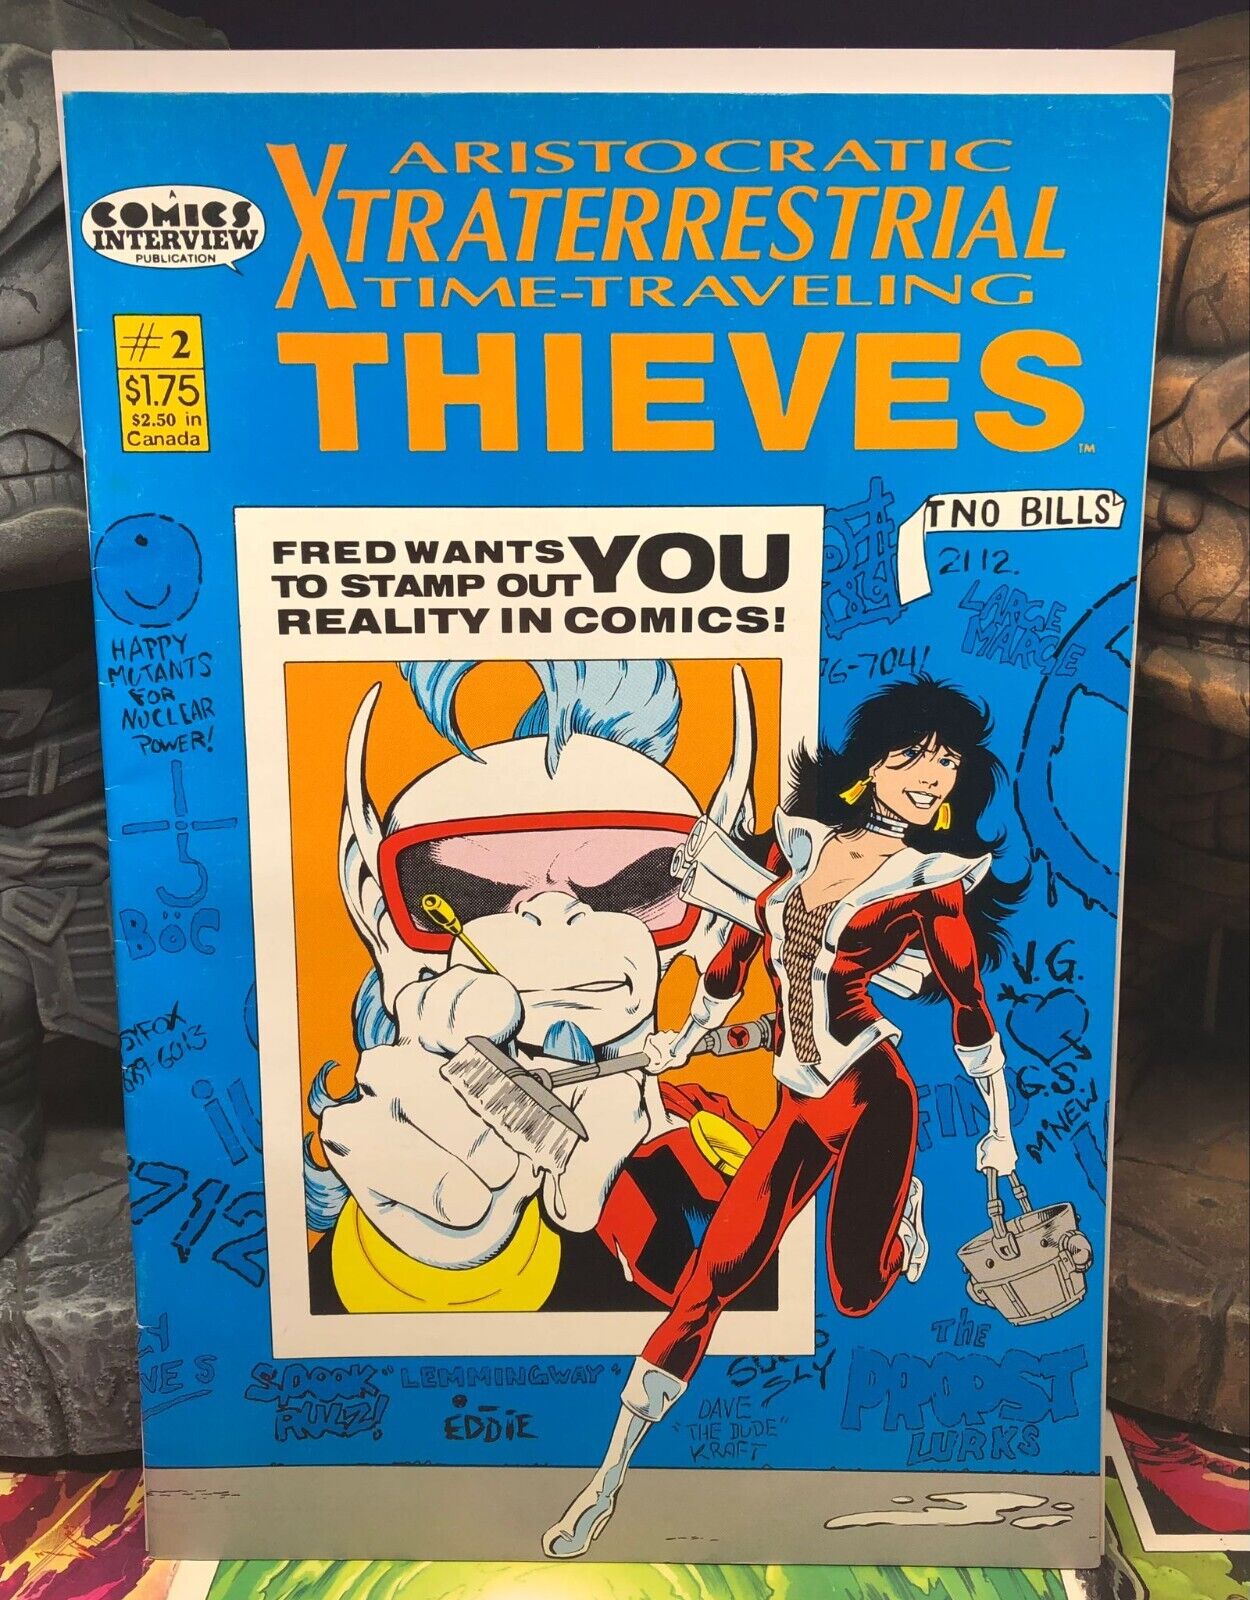 Aristocratic Xtraterrestrial Time-Traveling Thieves #2 | Comics Interview